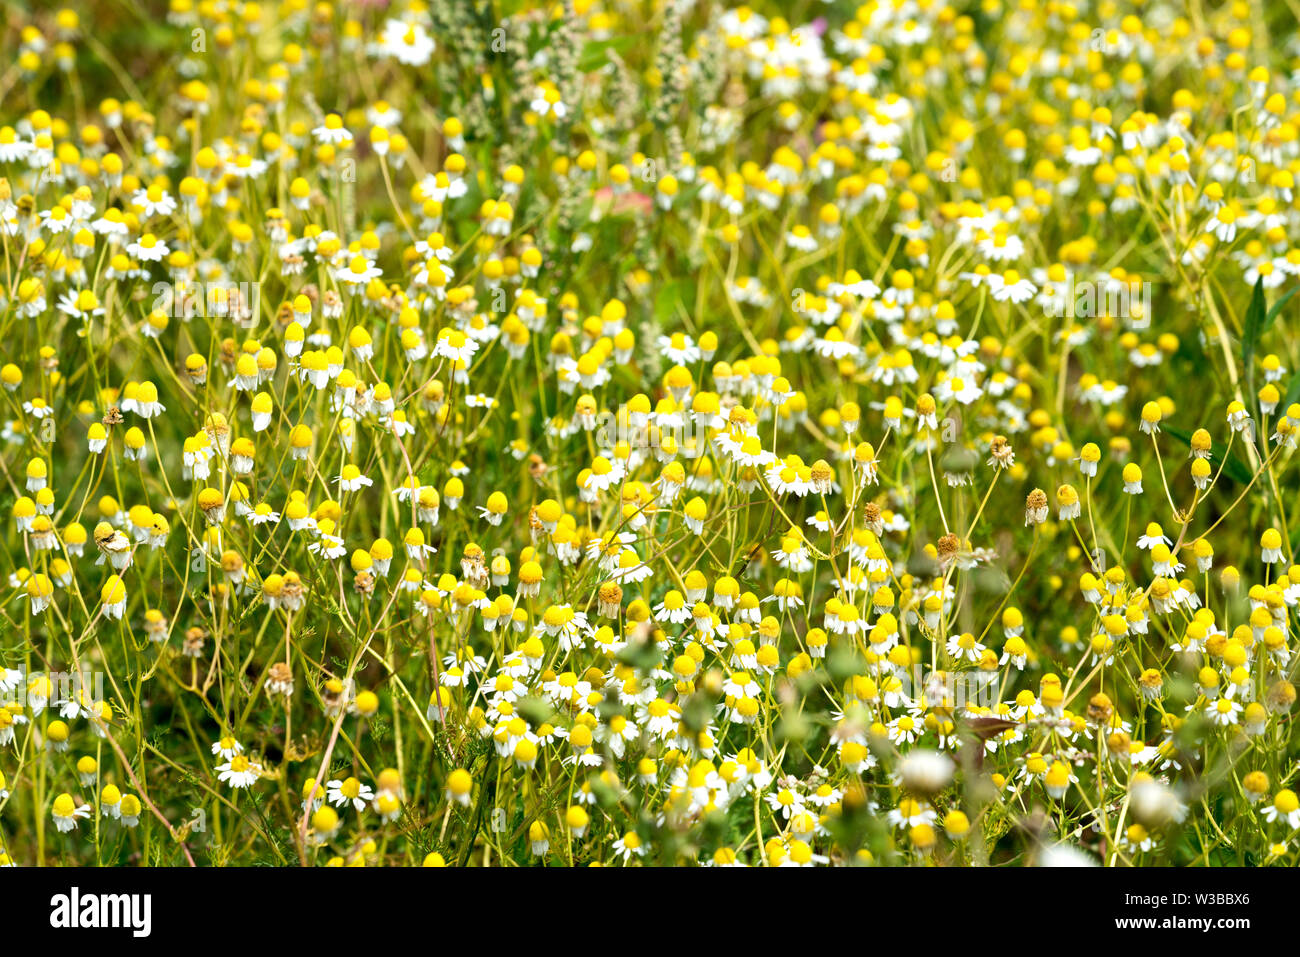 chamomile, Matricaria chamomilla, Fields of wildflowers, Germerode, Werra-Meissner district, Hesse, Germany Stock Photo